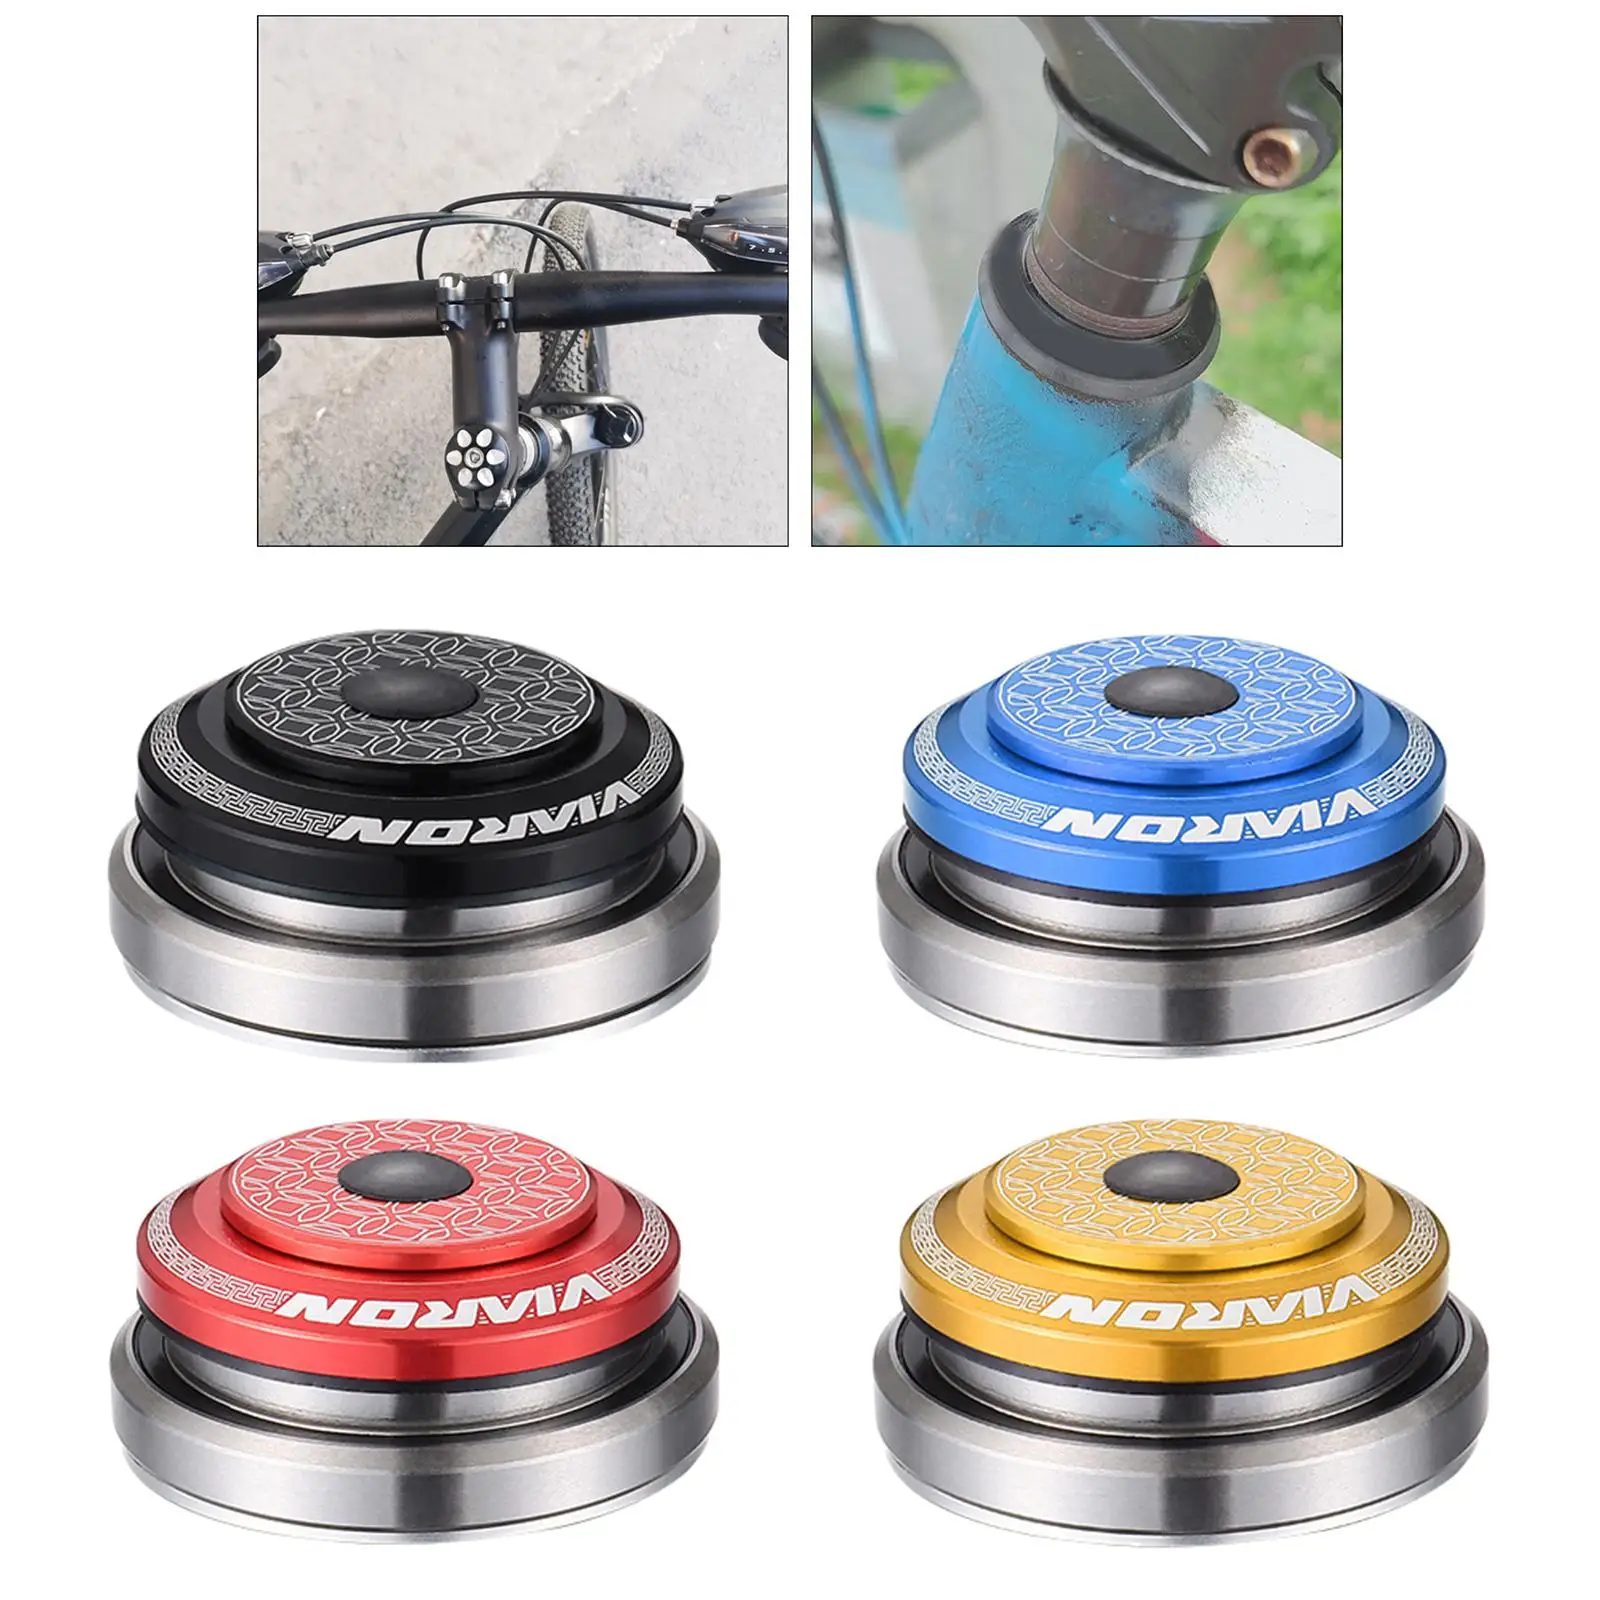 MTB Bearings Headset Double Bearing Bicycle Accessory for Road Bike Bicycle